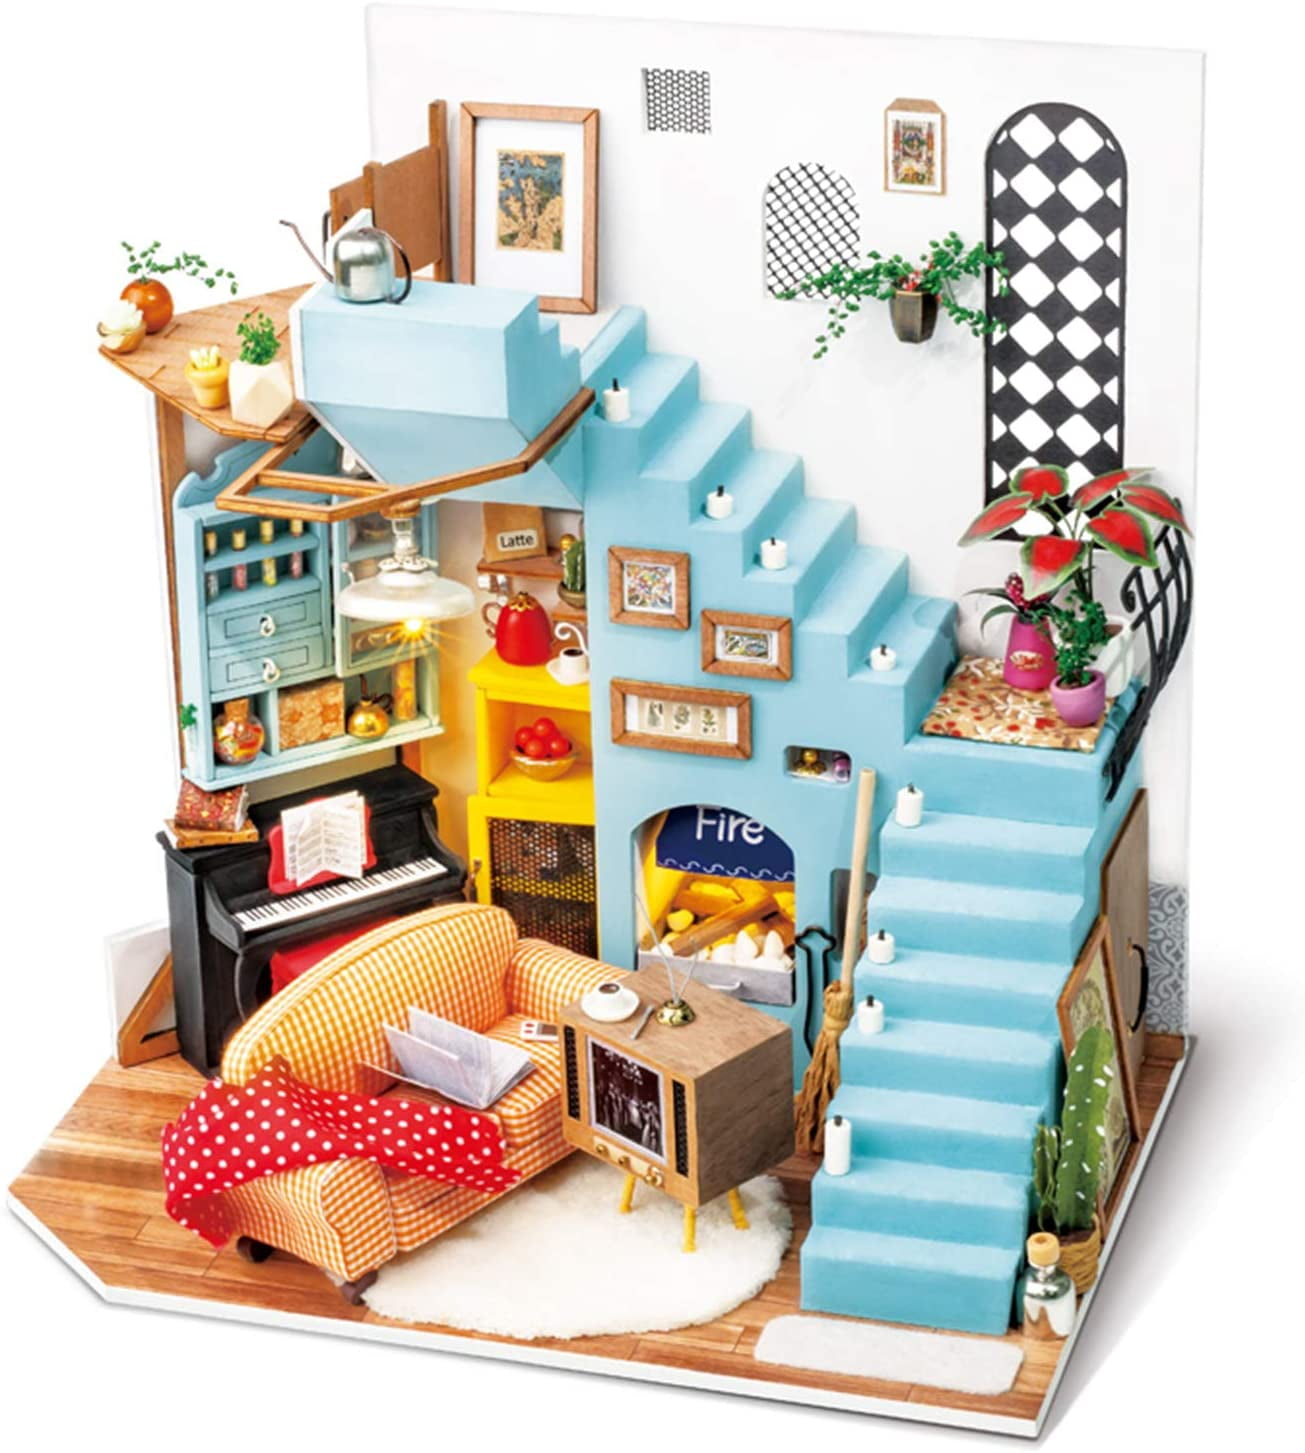 Rolife DIY Dollhouse Furniture Miniature Shop House Model Toy for Teens Adult 